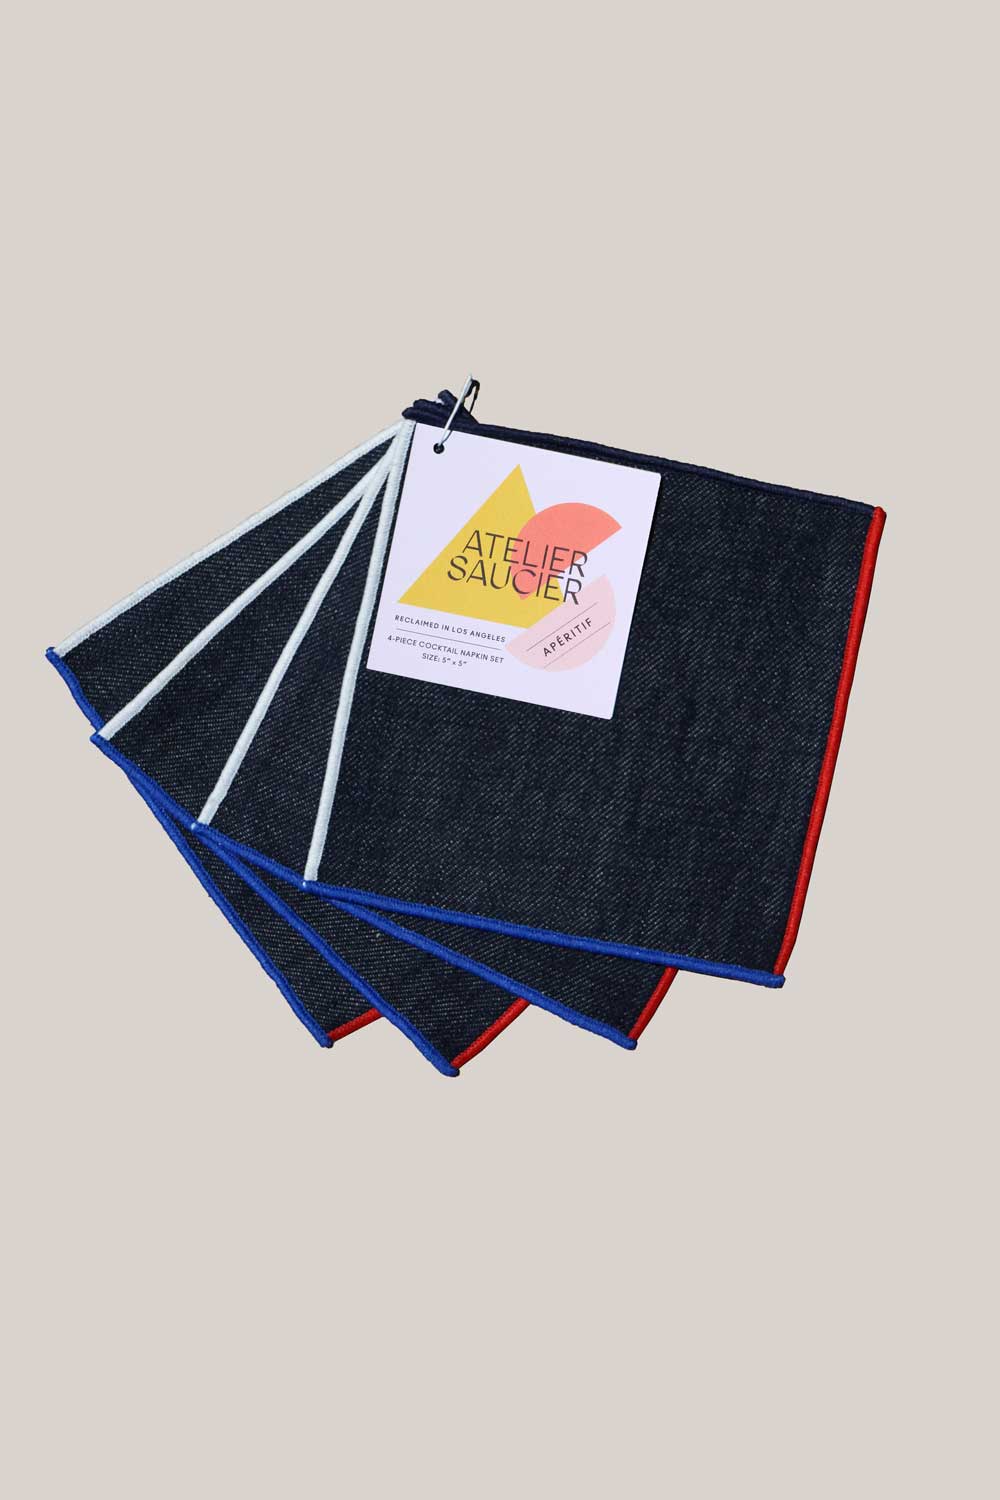 The Red, White + Blue Cocktail Napkins | Set of 4 COCKTAIL NAPKINS ATELIER SAUCIER - Atelier Saucier